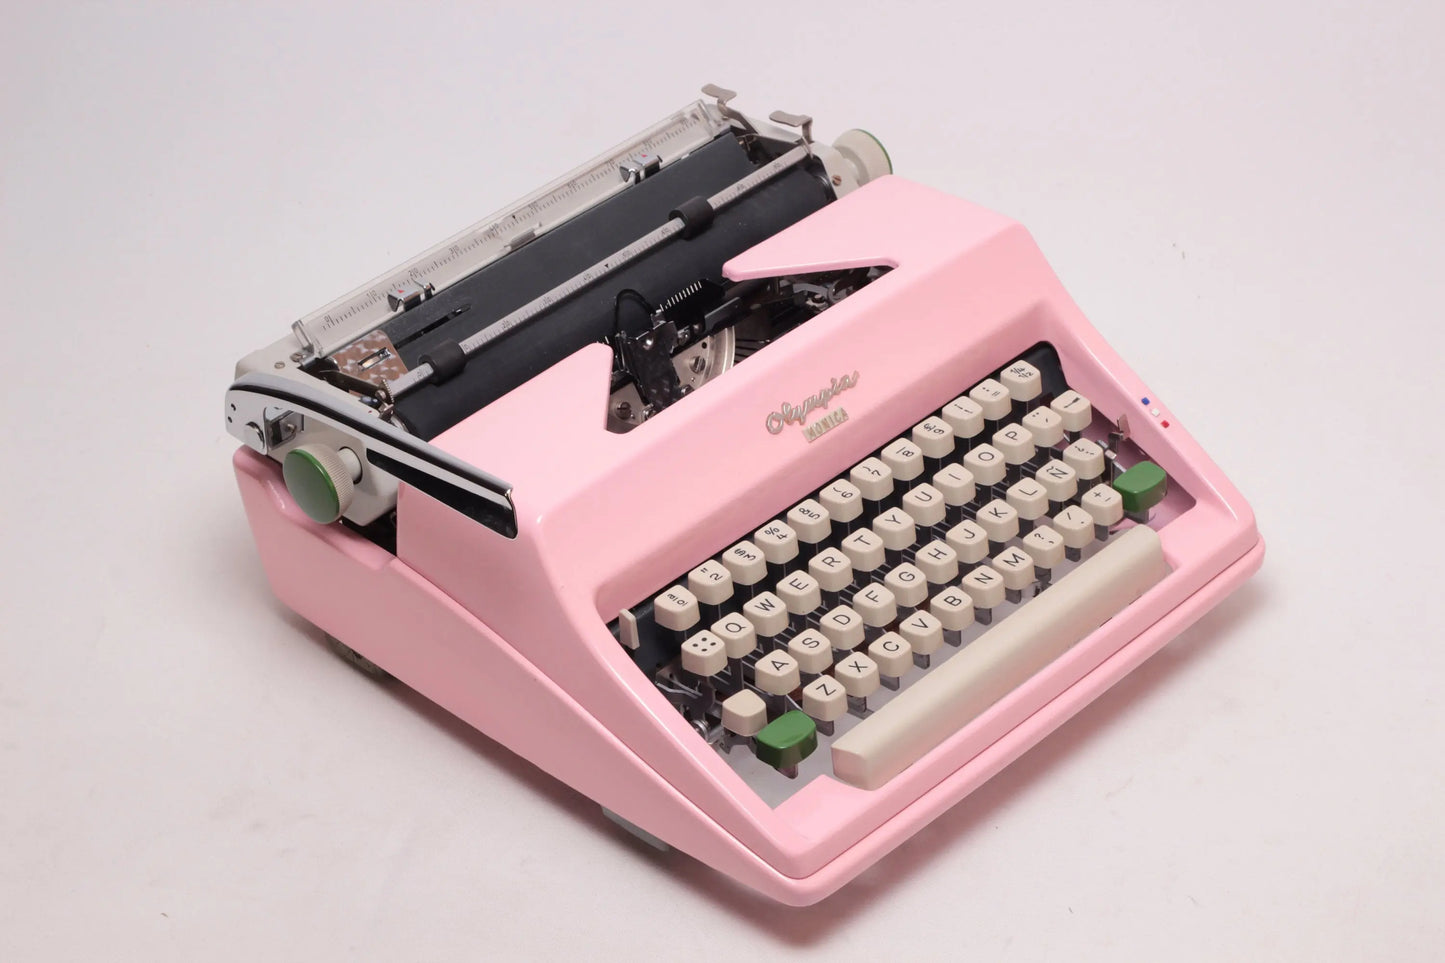 Limited Edition Olympia SM9 Pink Typewriter, Vintage, Mint Condition, Manual Portable, Professionally Serviced by Typewriter.Company - ElGranero Typewriter.Company